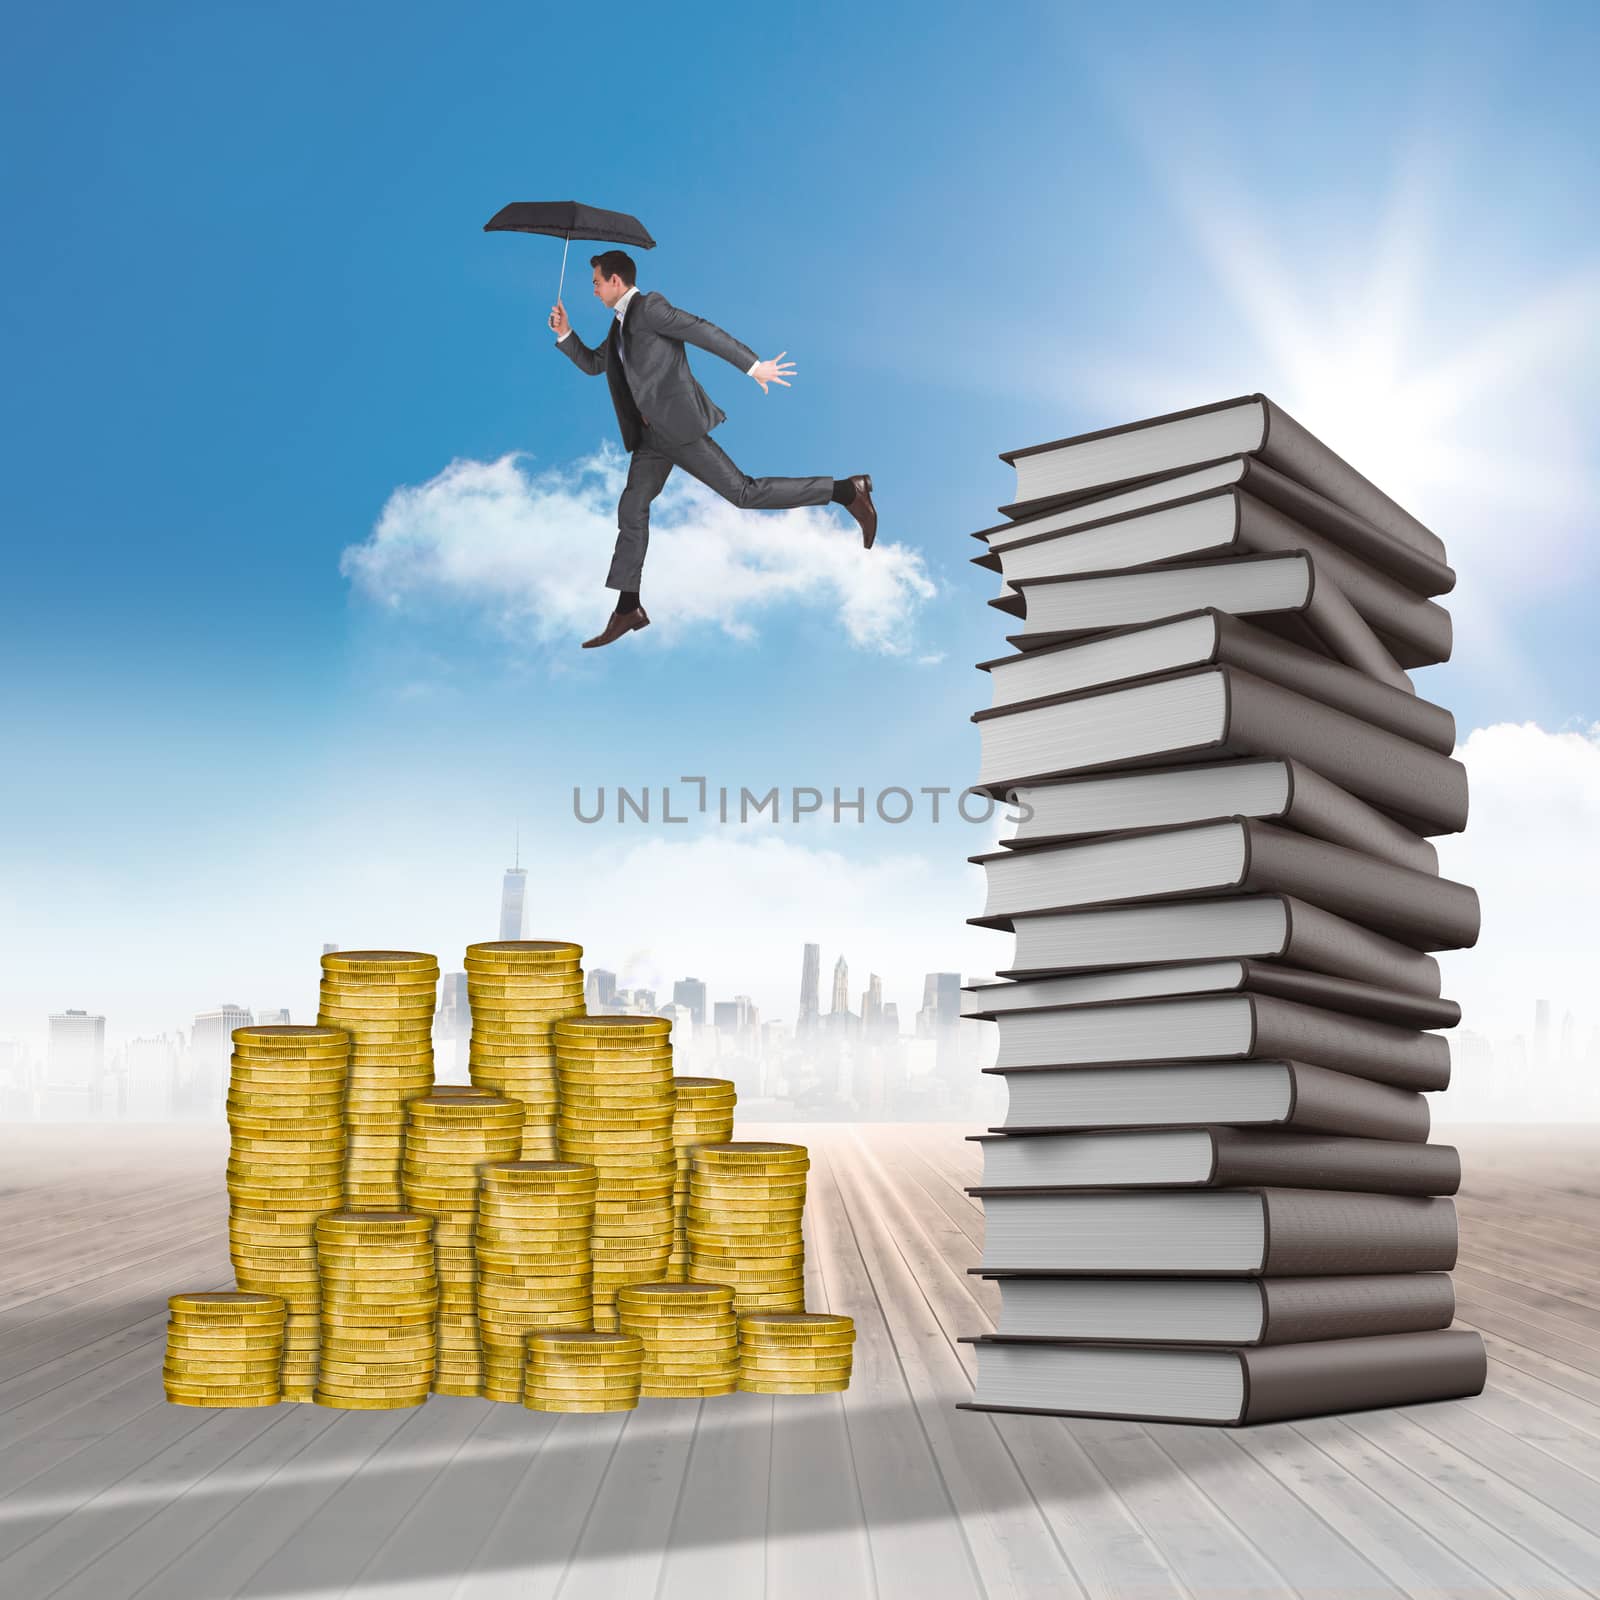 Composite image of businessman jumping holding an umbrella by Wavebreakmedia